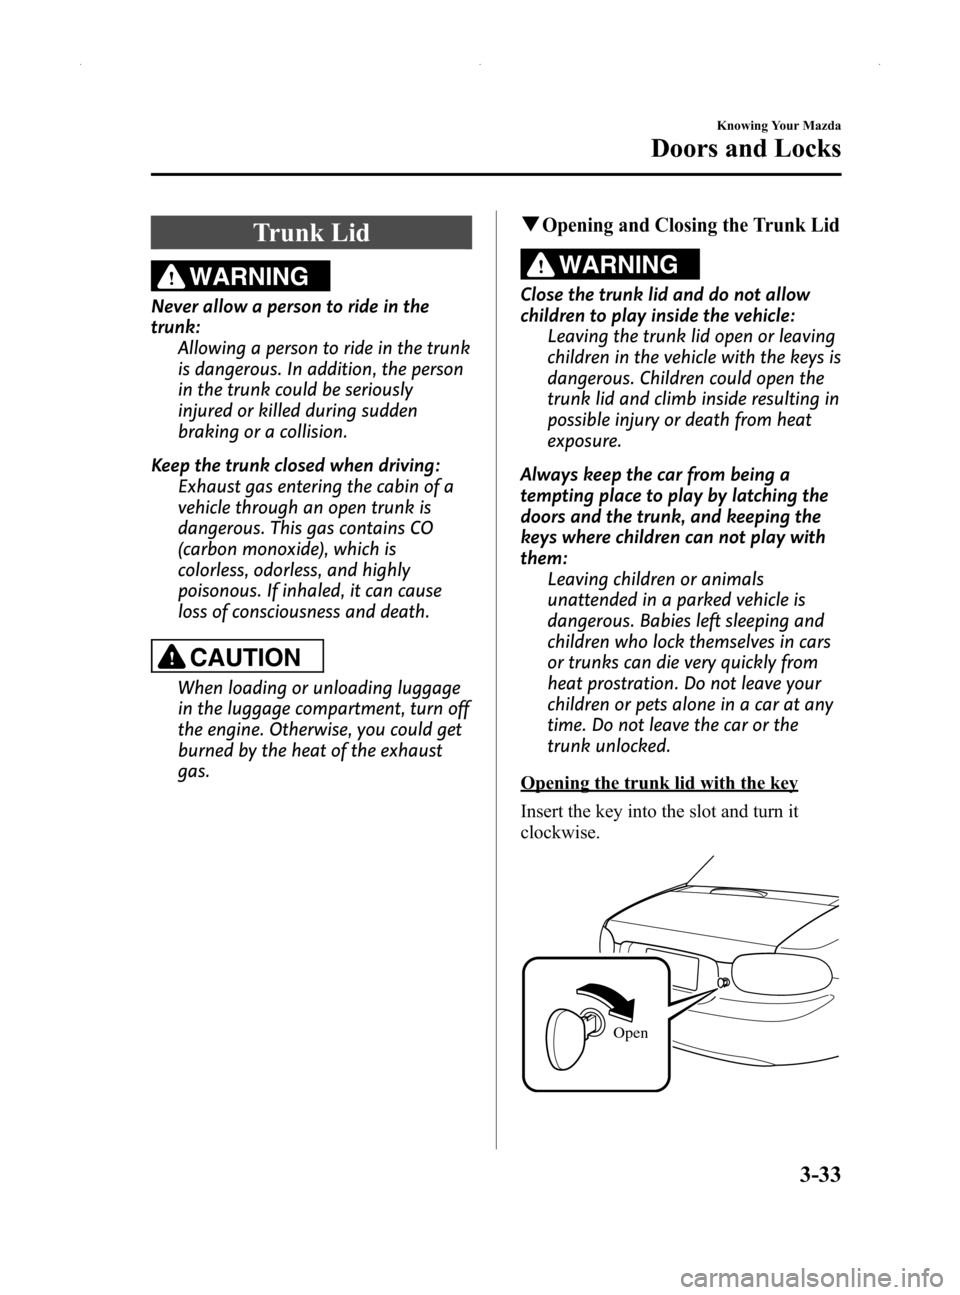 MAZDA MODEL MX-5 2014  Owners Manual (in English) Black plate (87,1)
Trunk Lid
WARNING
Never allow a person to ride in the
trunk:Allowing a person to ride in the trunk
is dangerous. In addition, the person
in the trunk could be seriously
injured or k